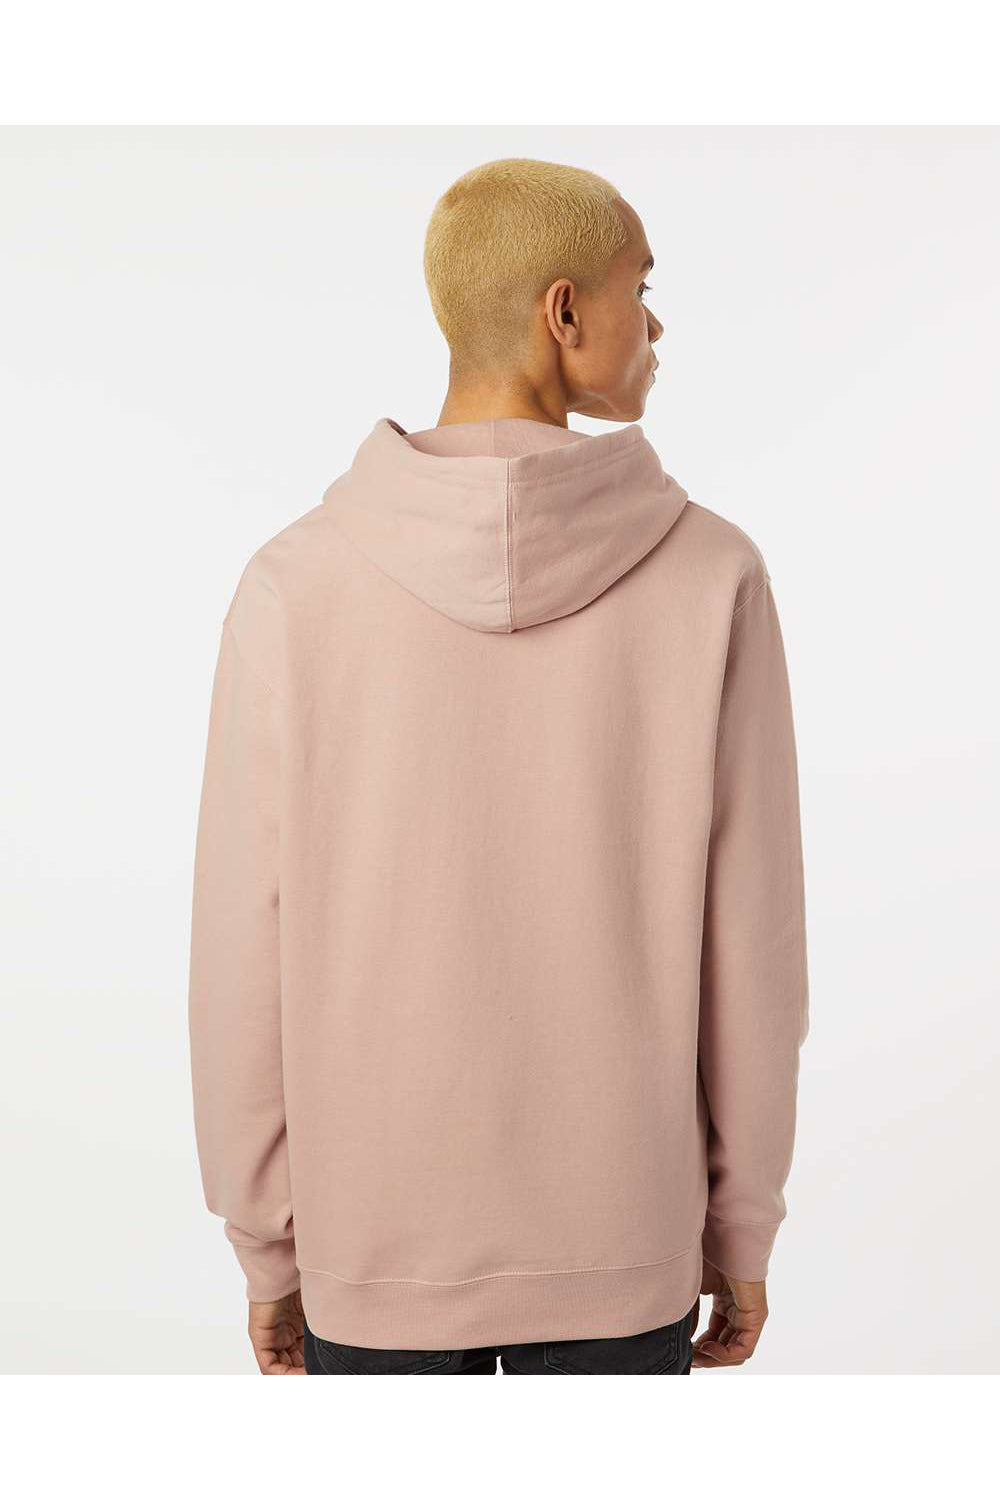 Independent Trading Co. SS4500 Mens Hooded Sweatshirt Hoodie Dusty Pink Model Back